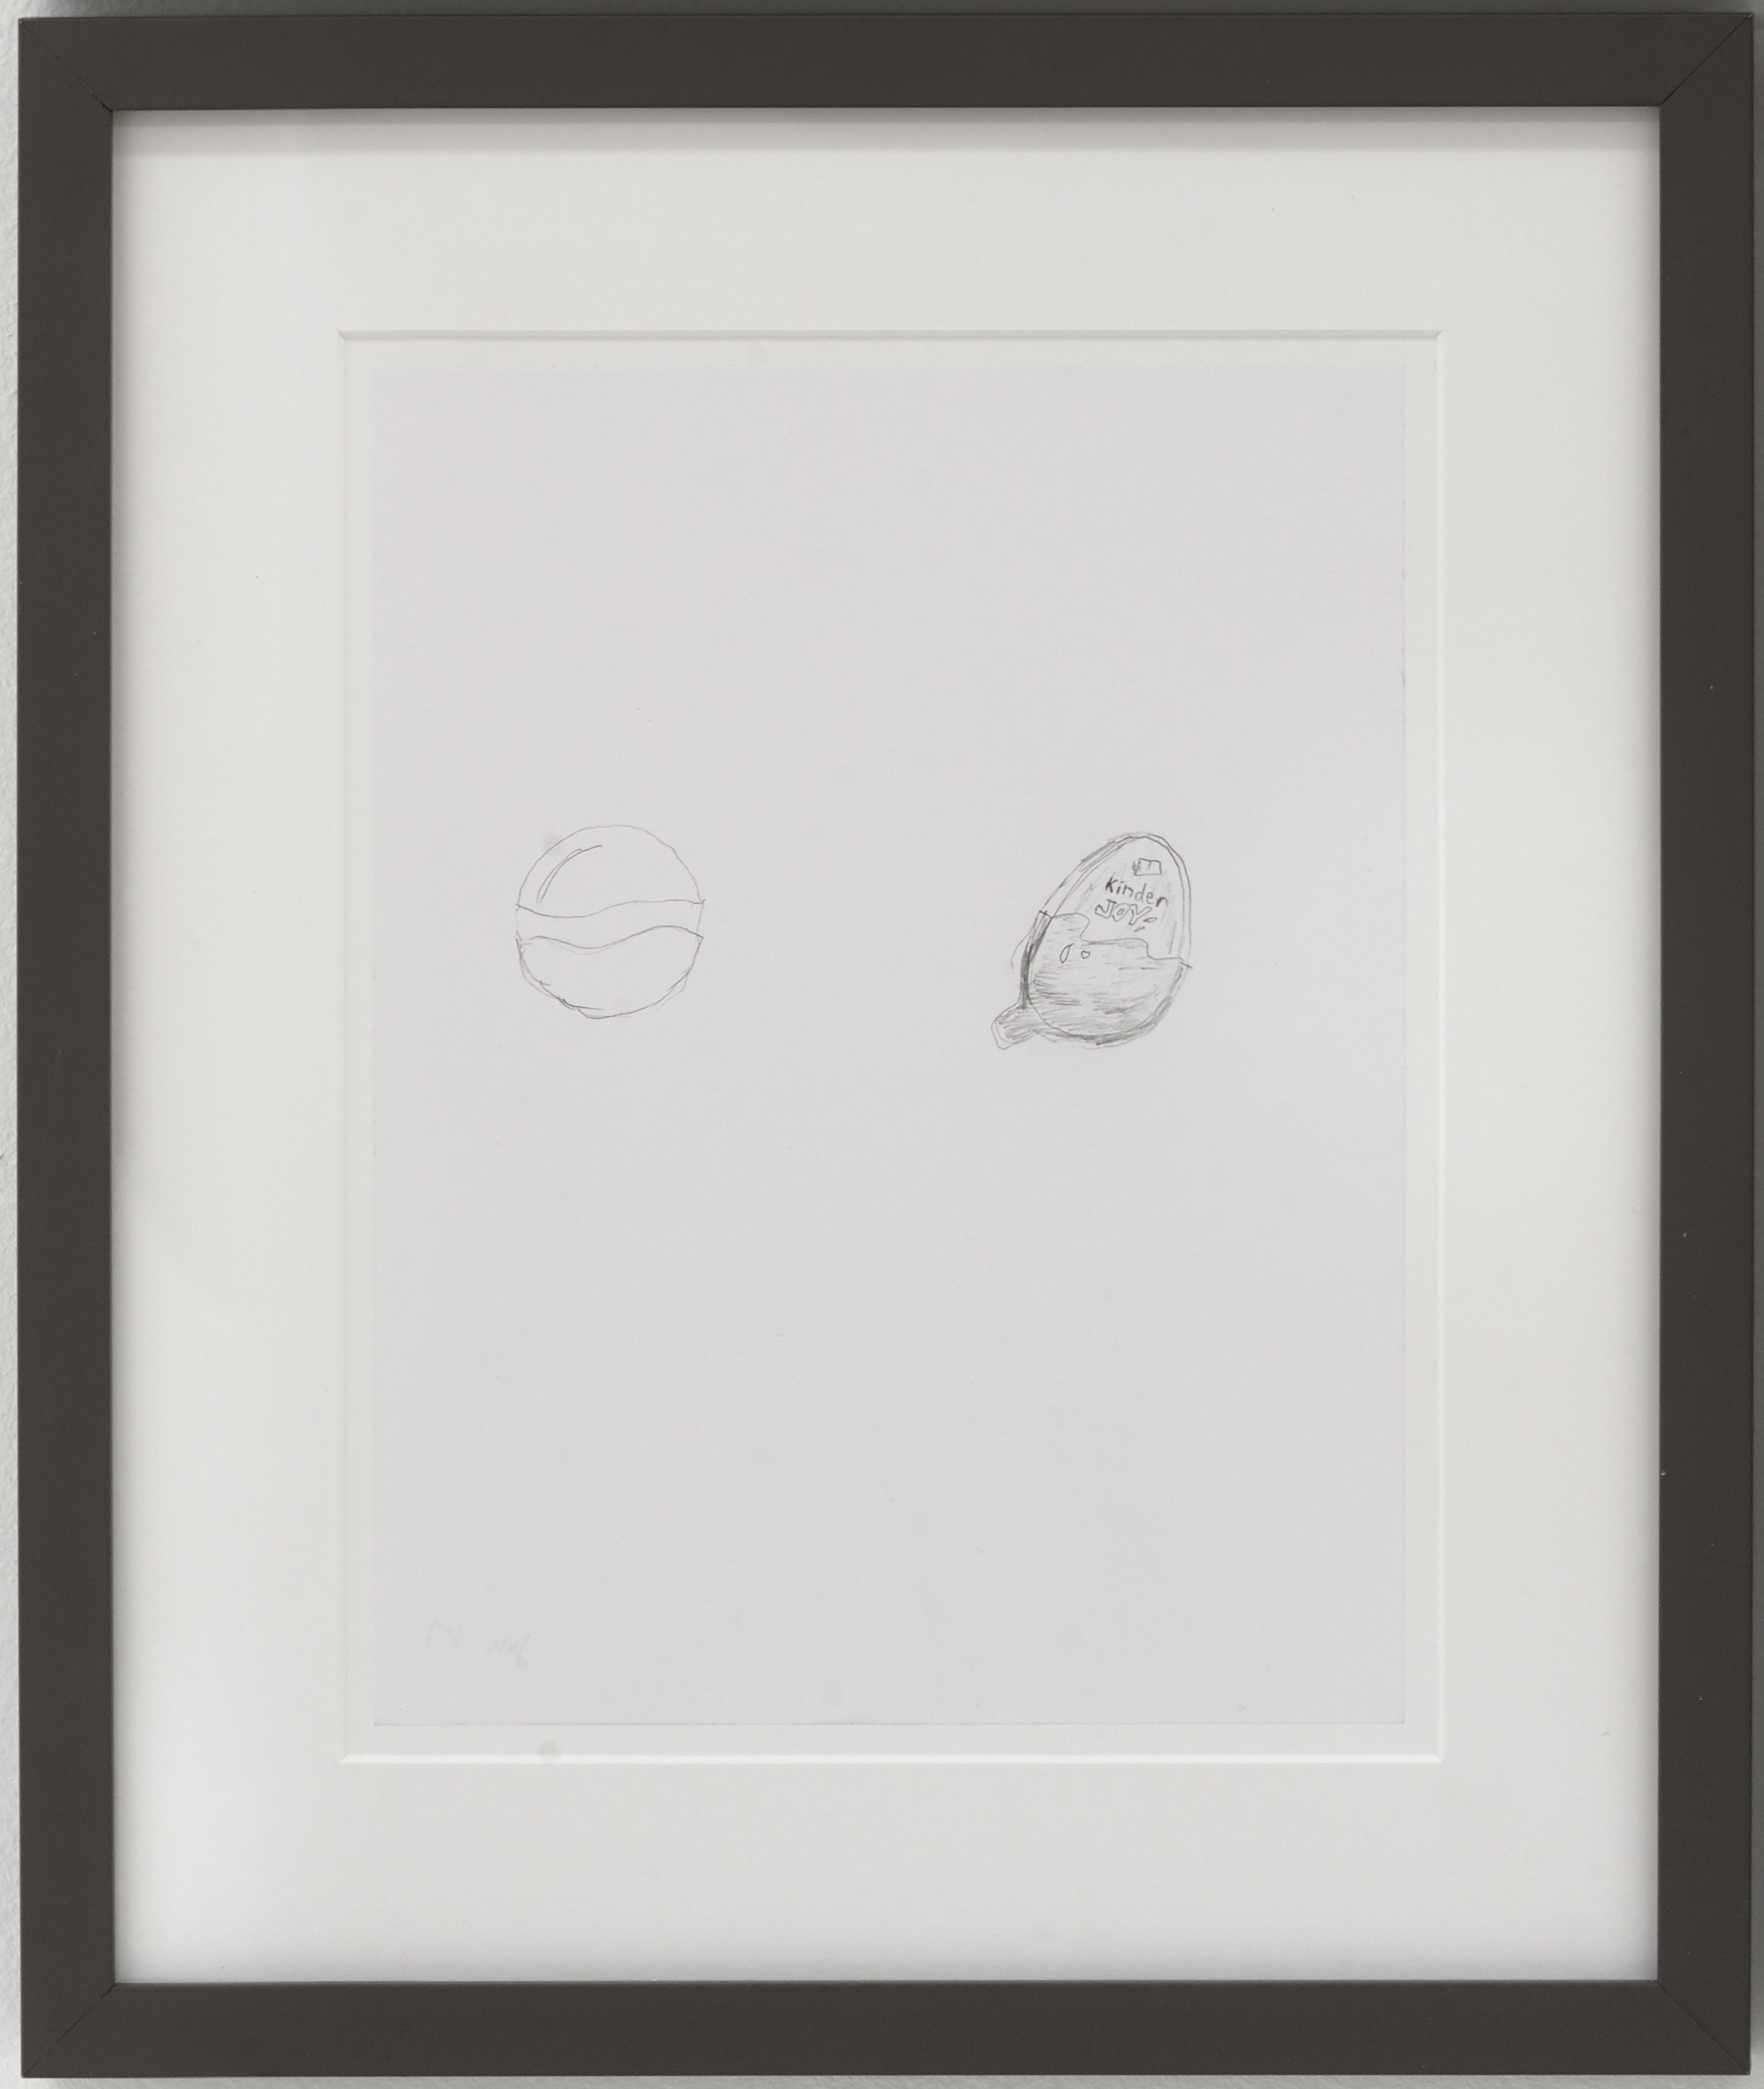  Jesse Sullivan,  Untitled , 2019, Pencil on paper, framed, 11 × 8 1/2 inches   